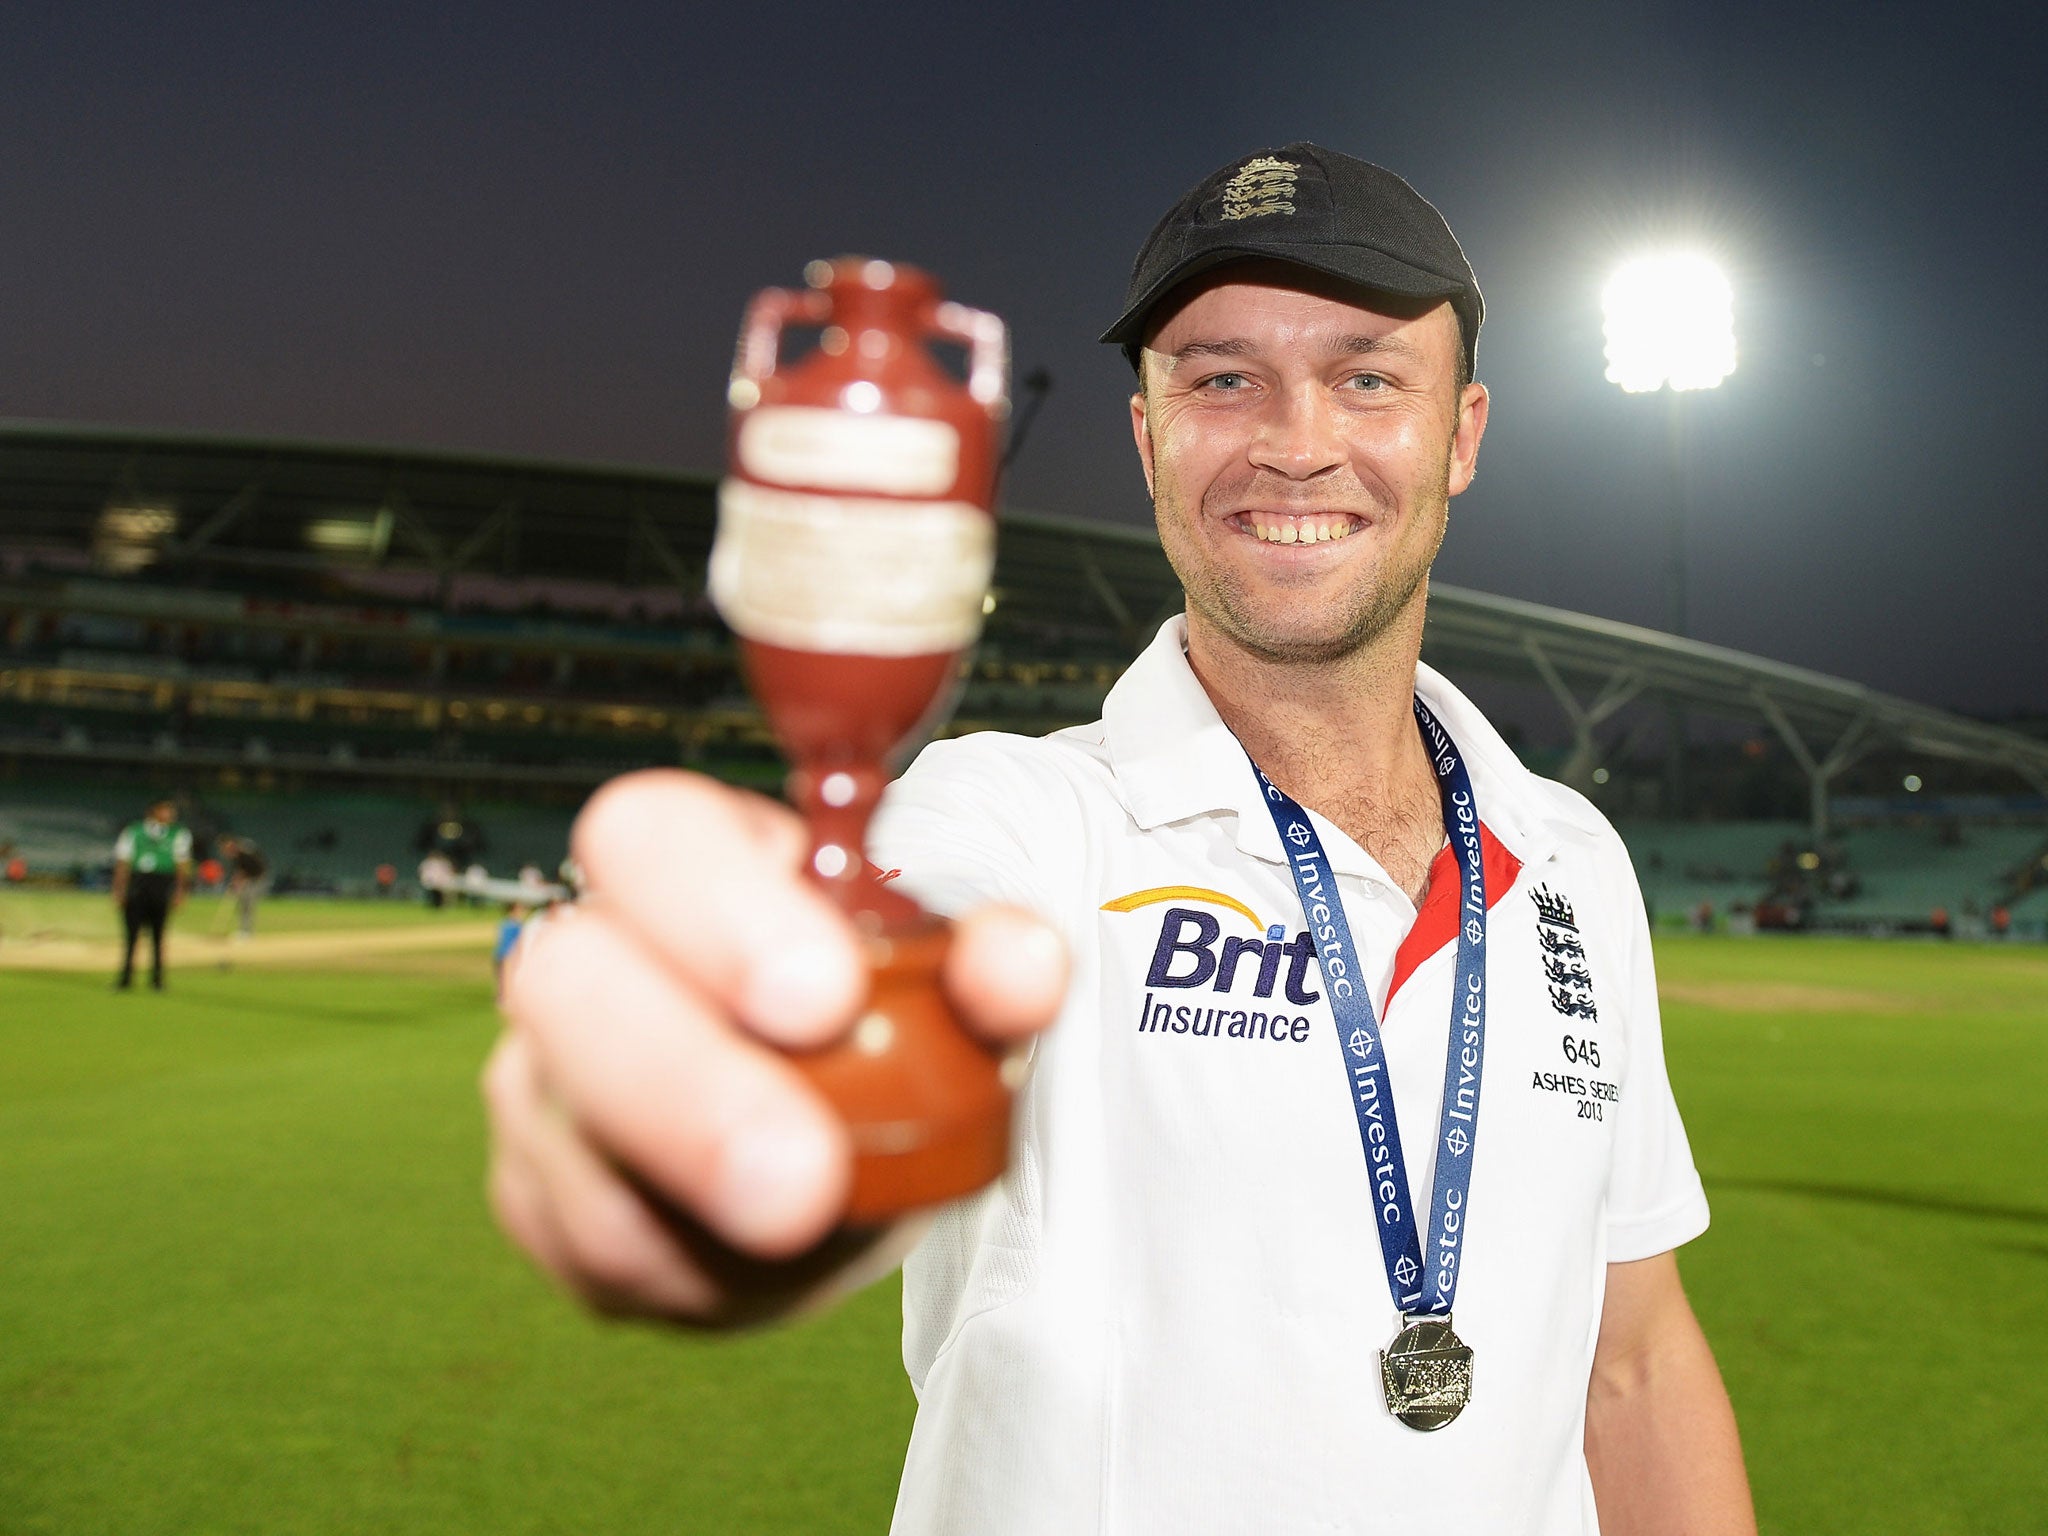 Jonathan Trott poses with the urn after England won the Ashes last year